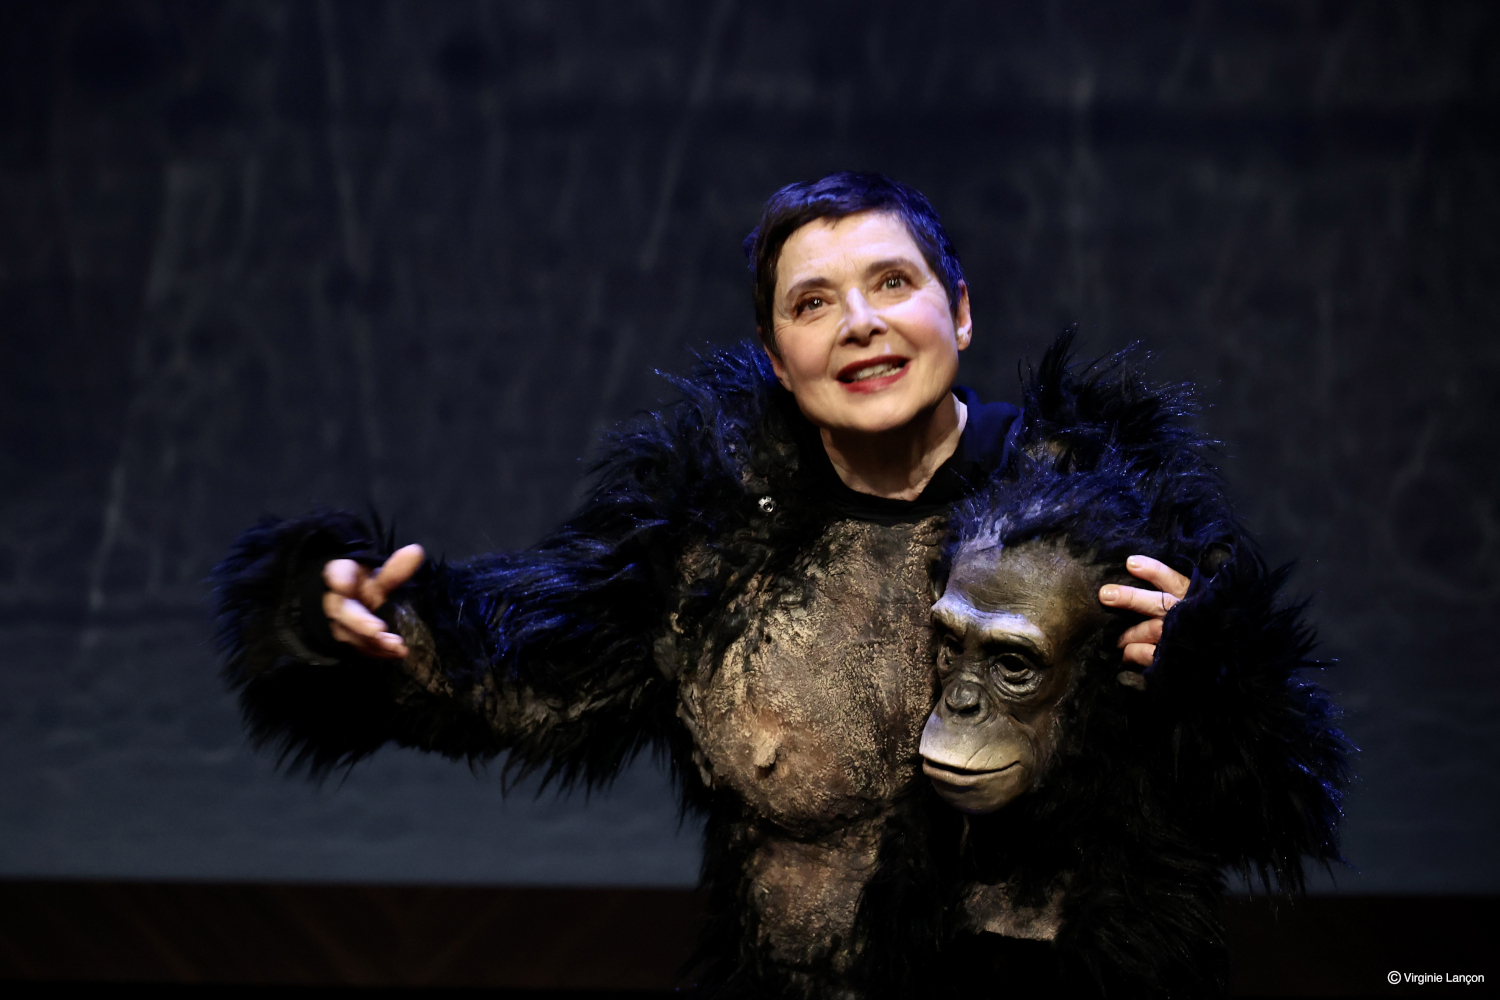 Isabella Rossellini brings art and science to the stage with Darwin in mind